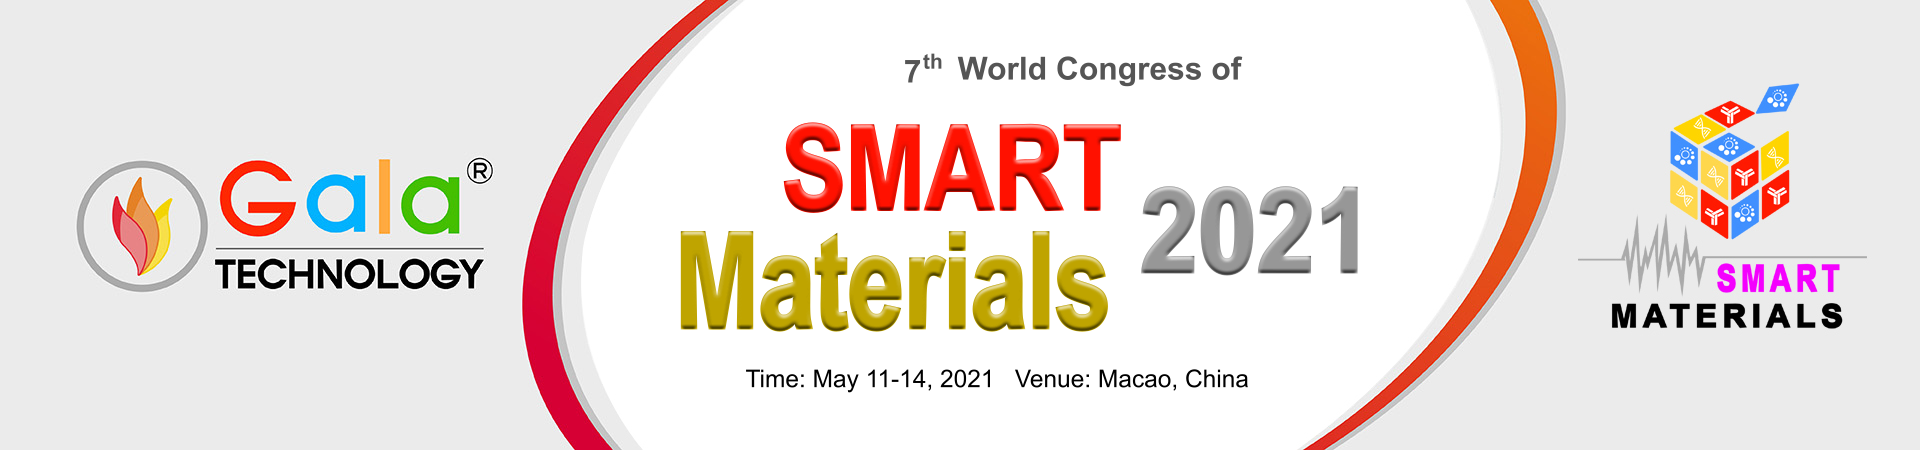 The 7th World Congress of Smart Materials 2021, Macao Special Administrative Region, China